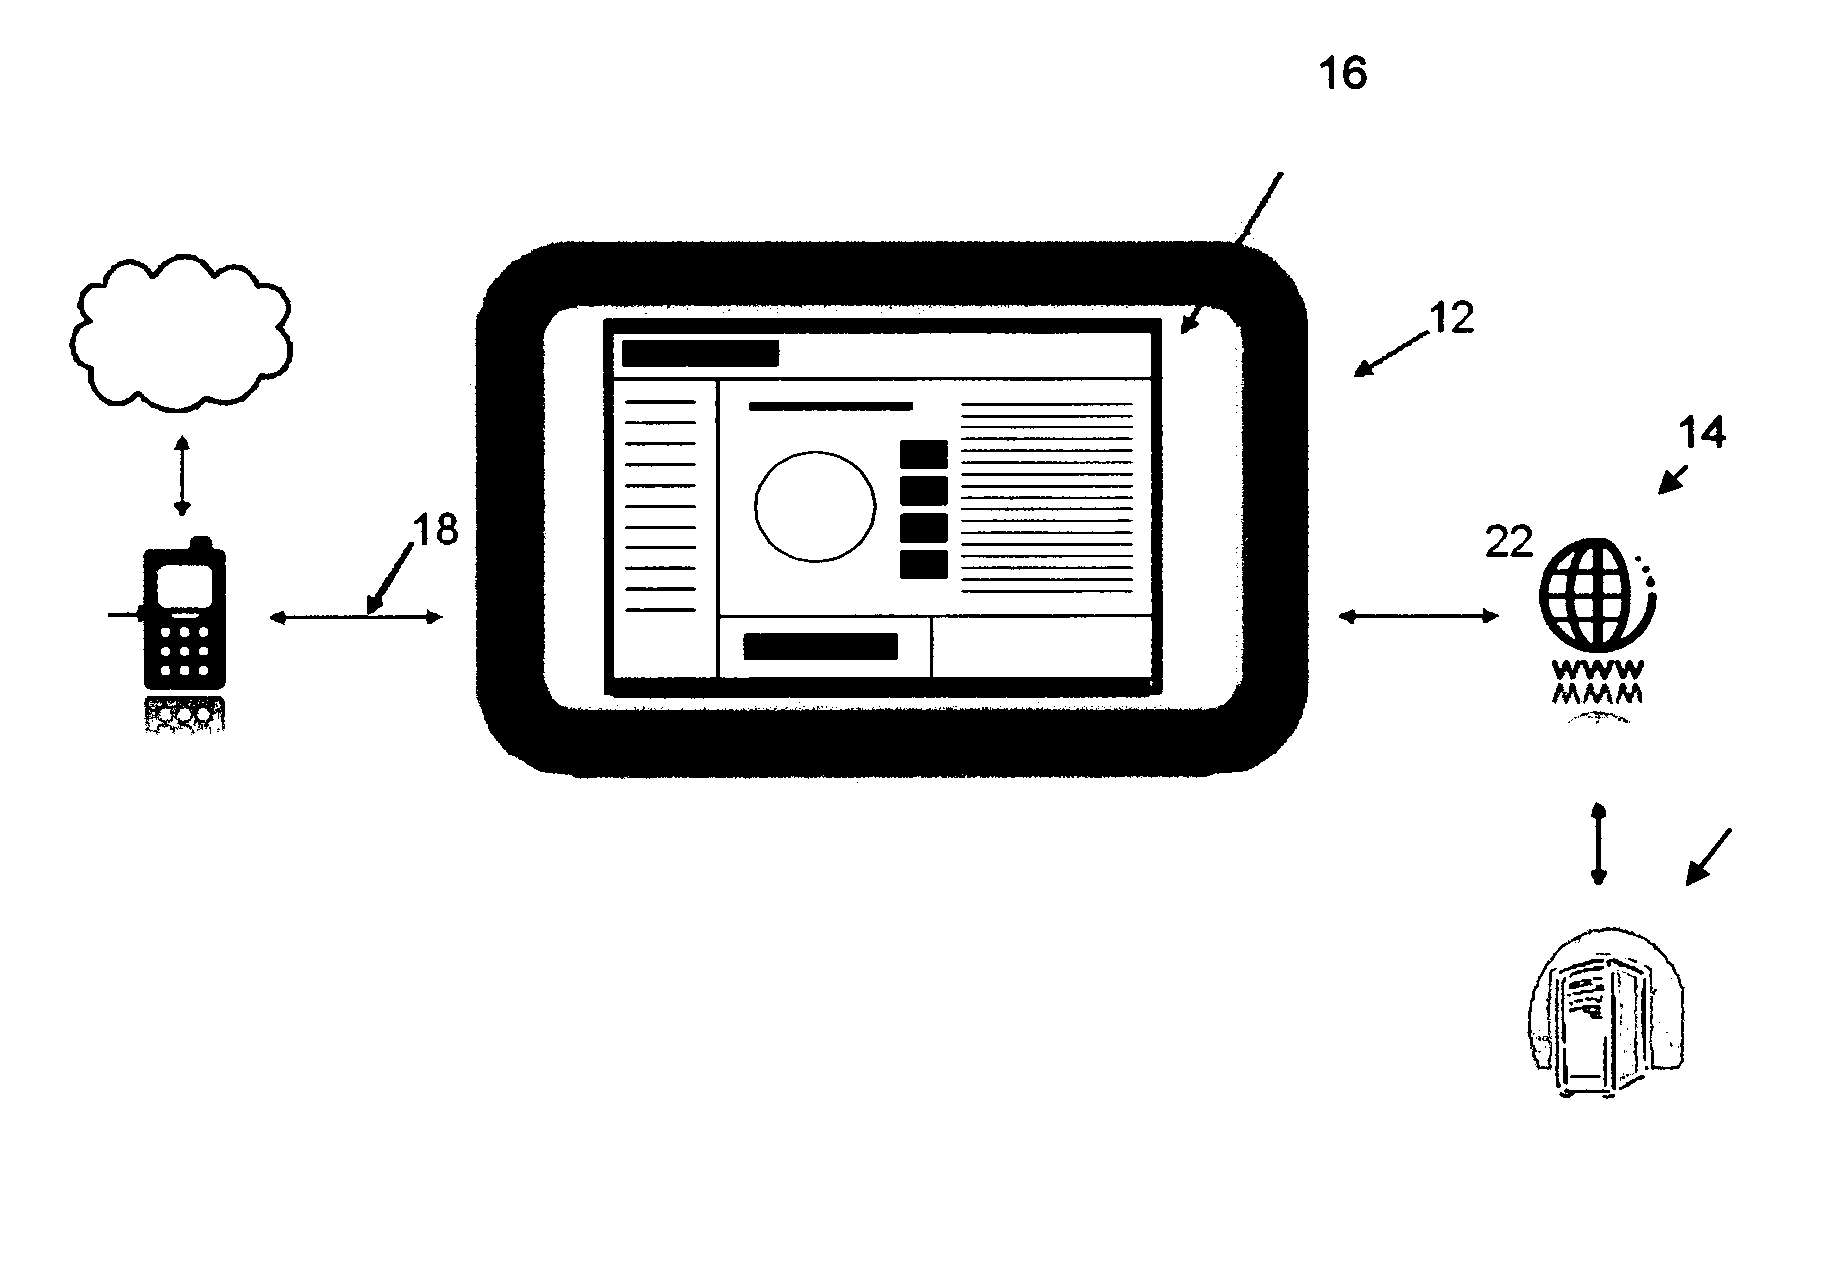 Method of indentifying devices in mobile and desktop environments